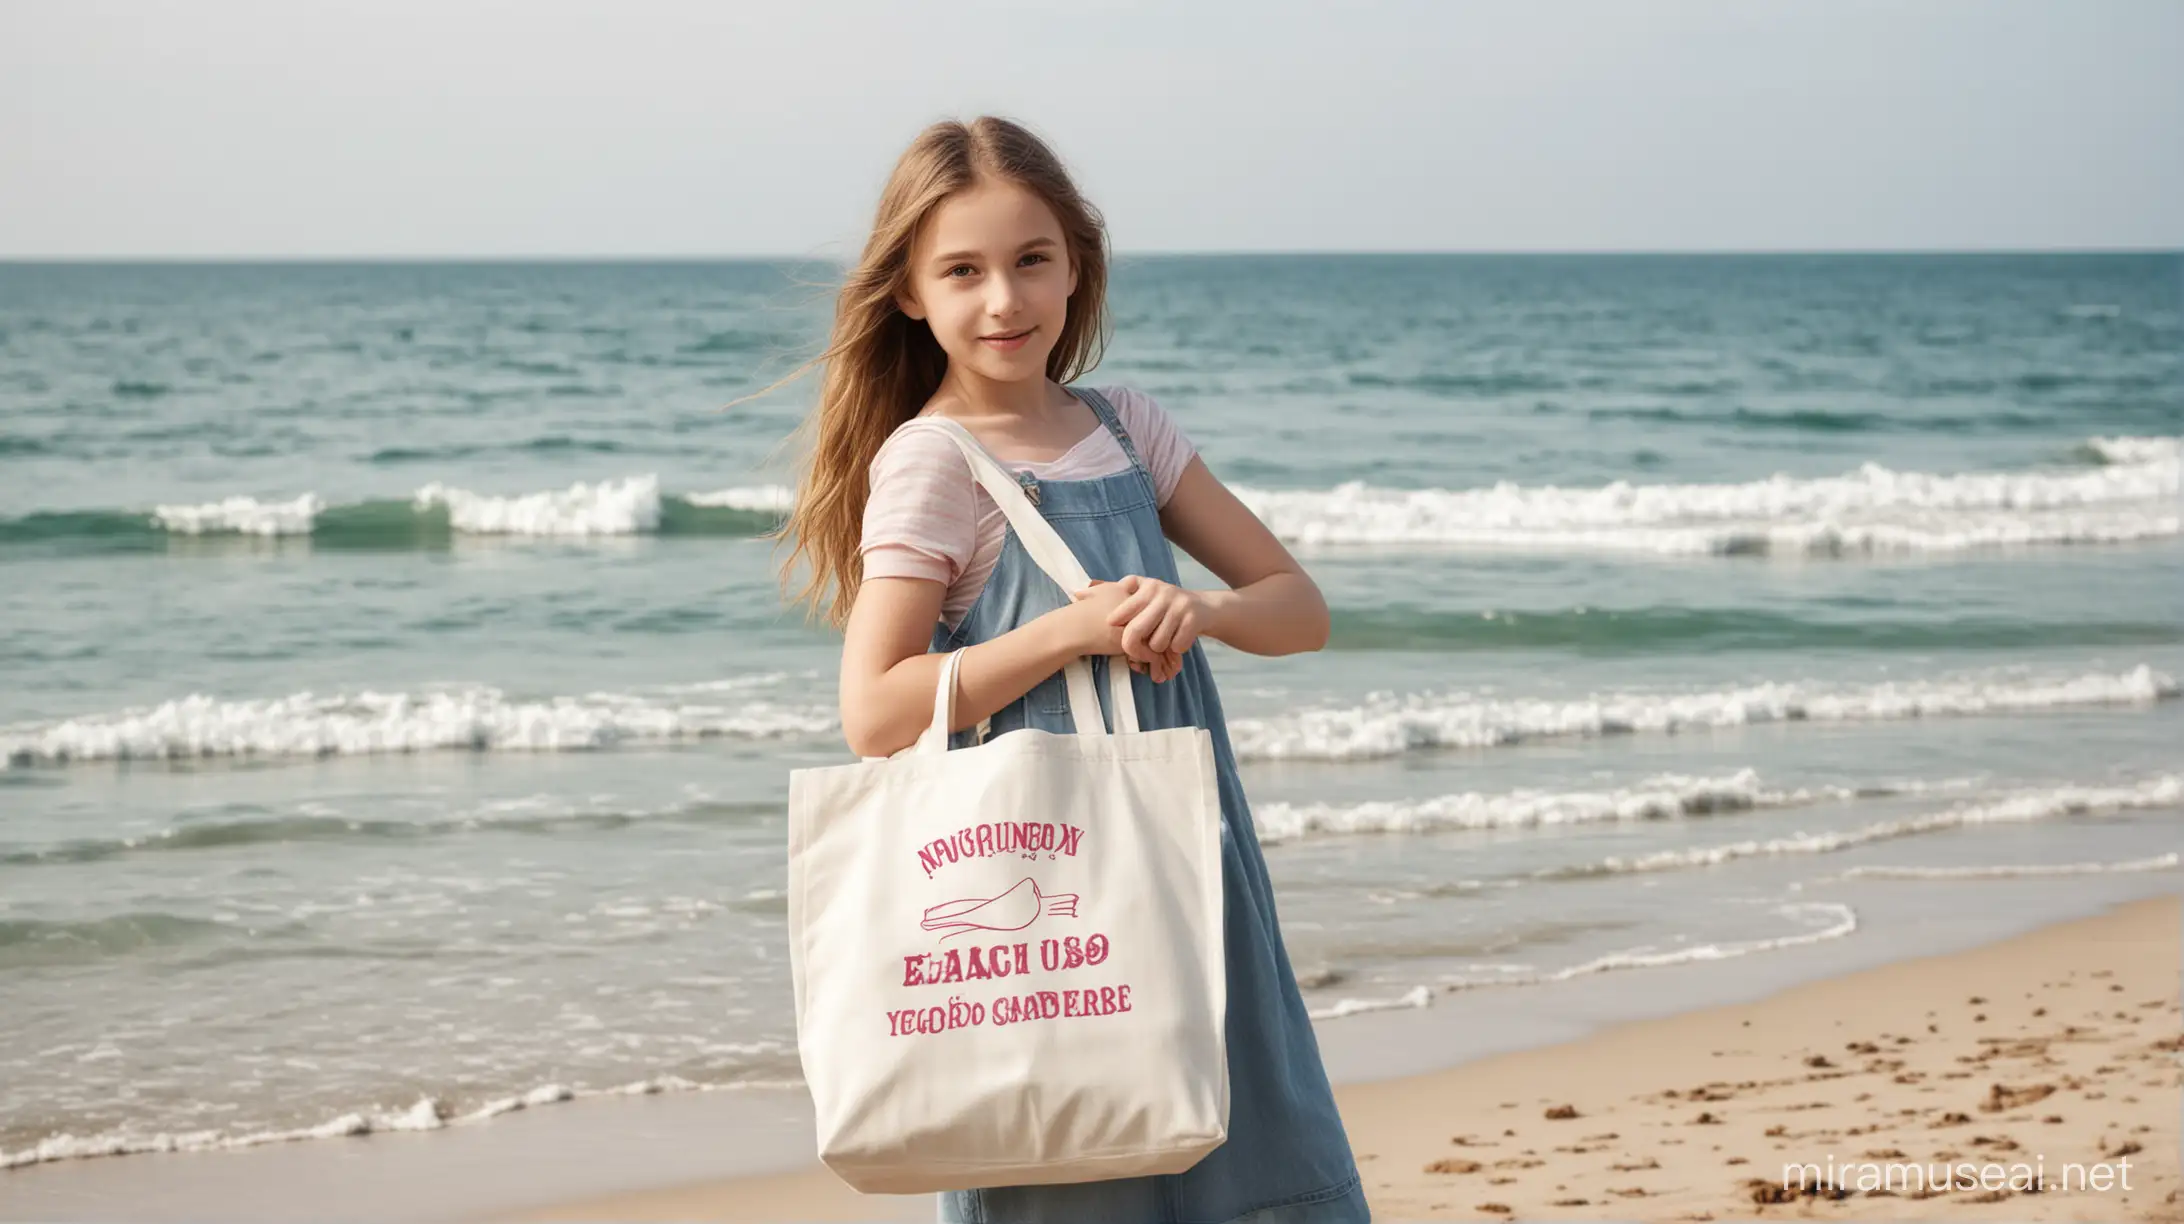 Girl with Tote Bag Standing on Beach by the Sea